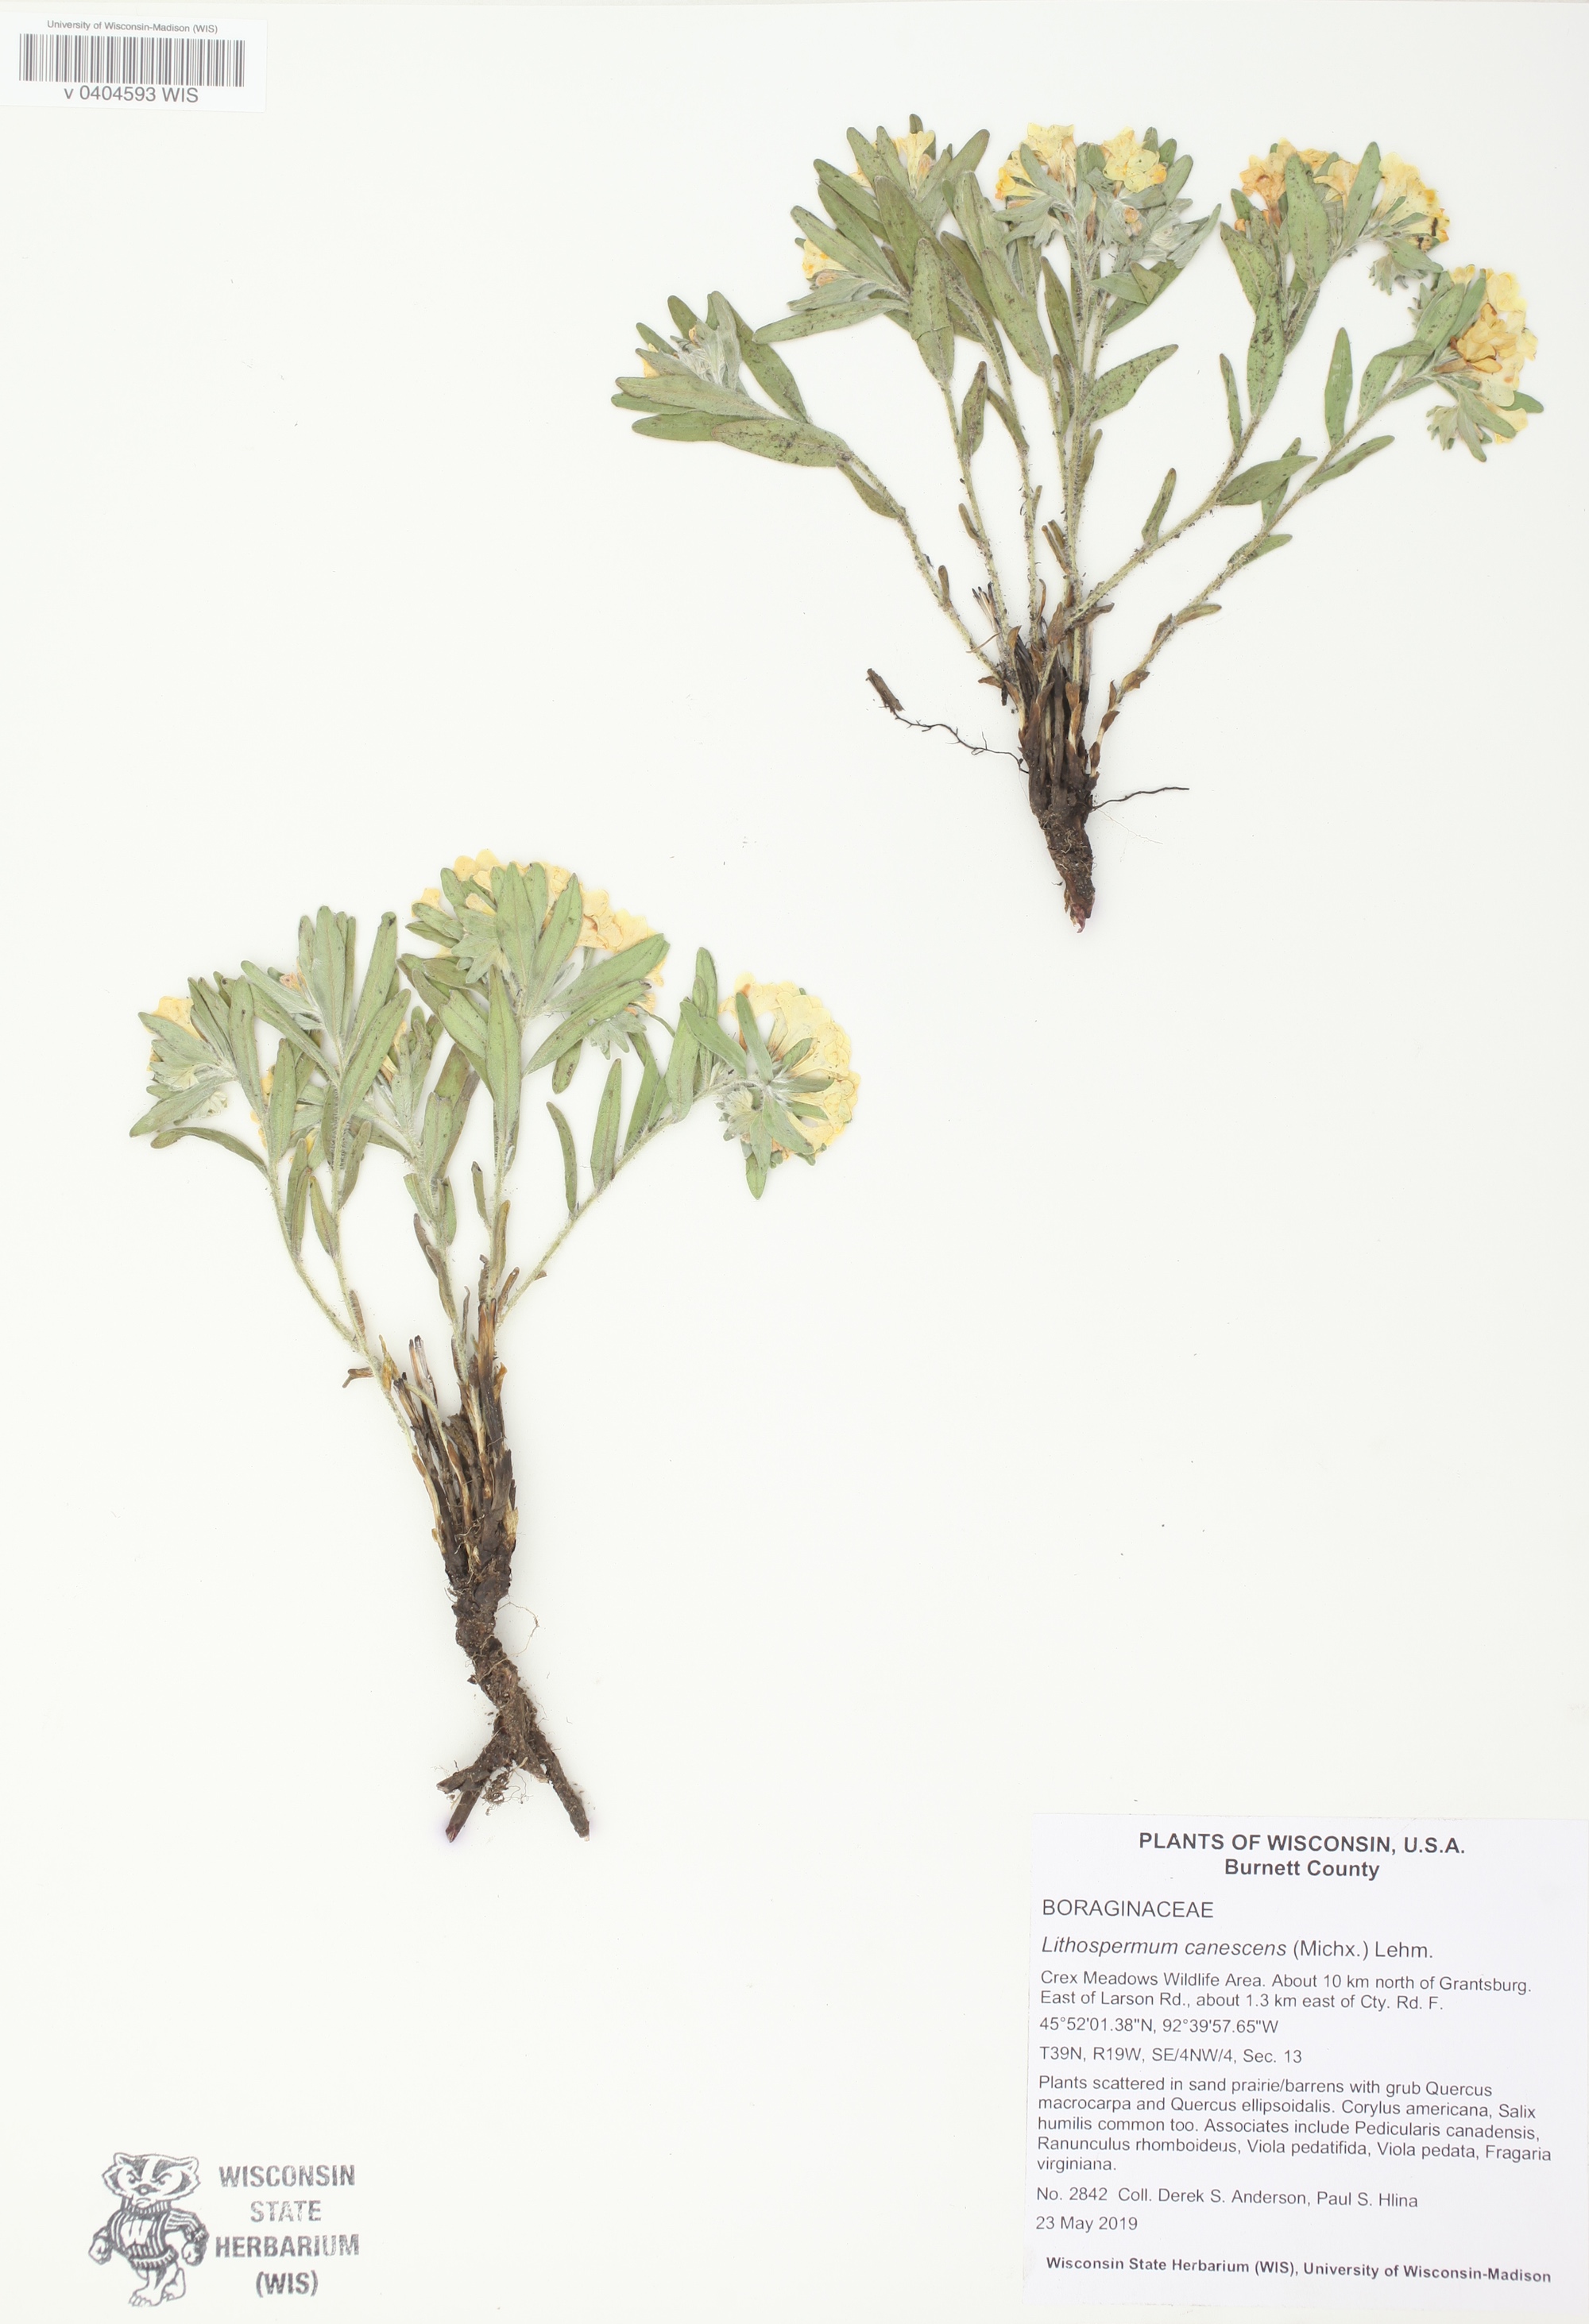 Hoary Puccoon specimen collected in the Crex Meadows Wildlife Area near Grantsburg in Burnett County on May 23, 2019.